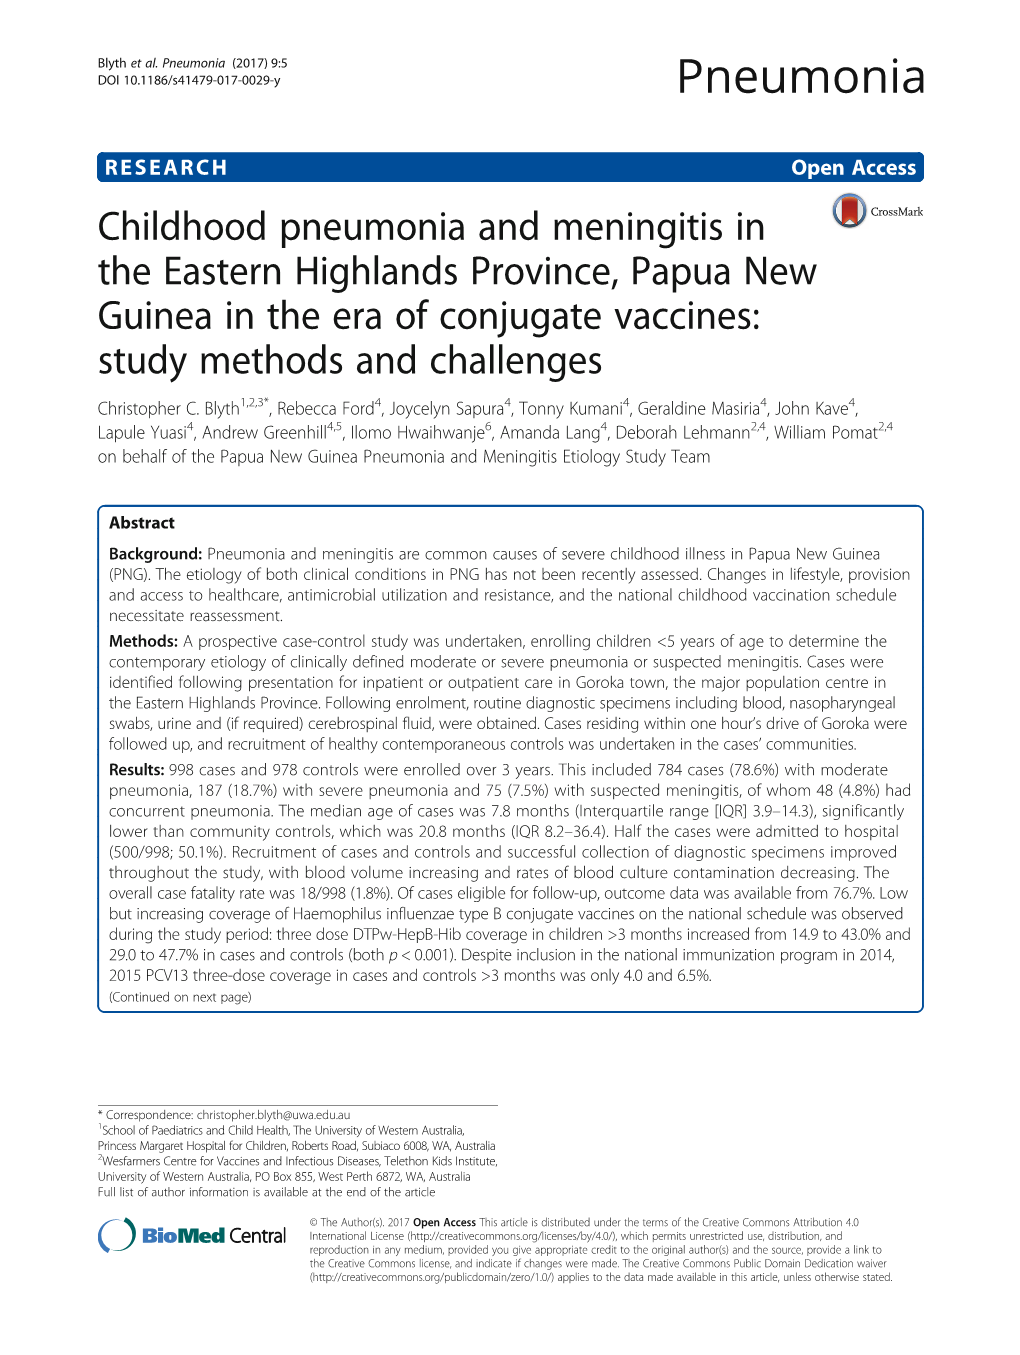 Childhood Pneumonia and Meningitis in the Eastern Highlands Province, Papua New Guinea in the Era of Conjugate Vaccines: Study Methods and Challenges Christopher C